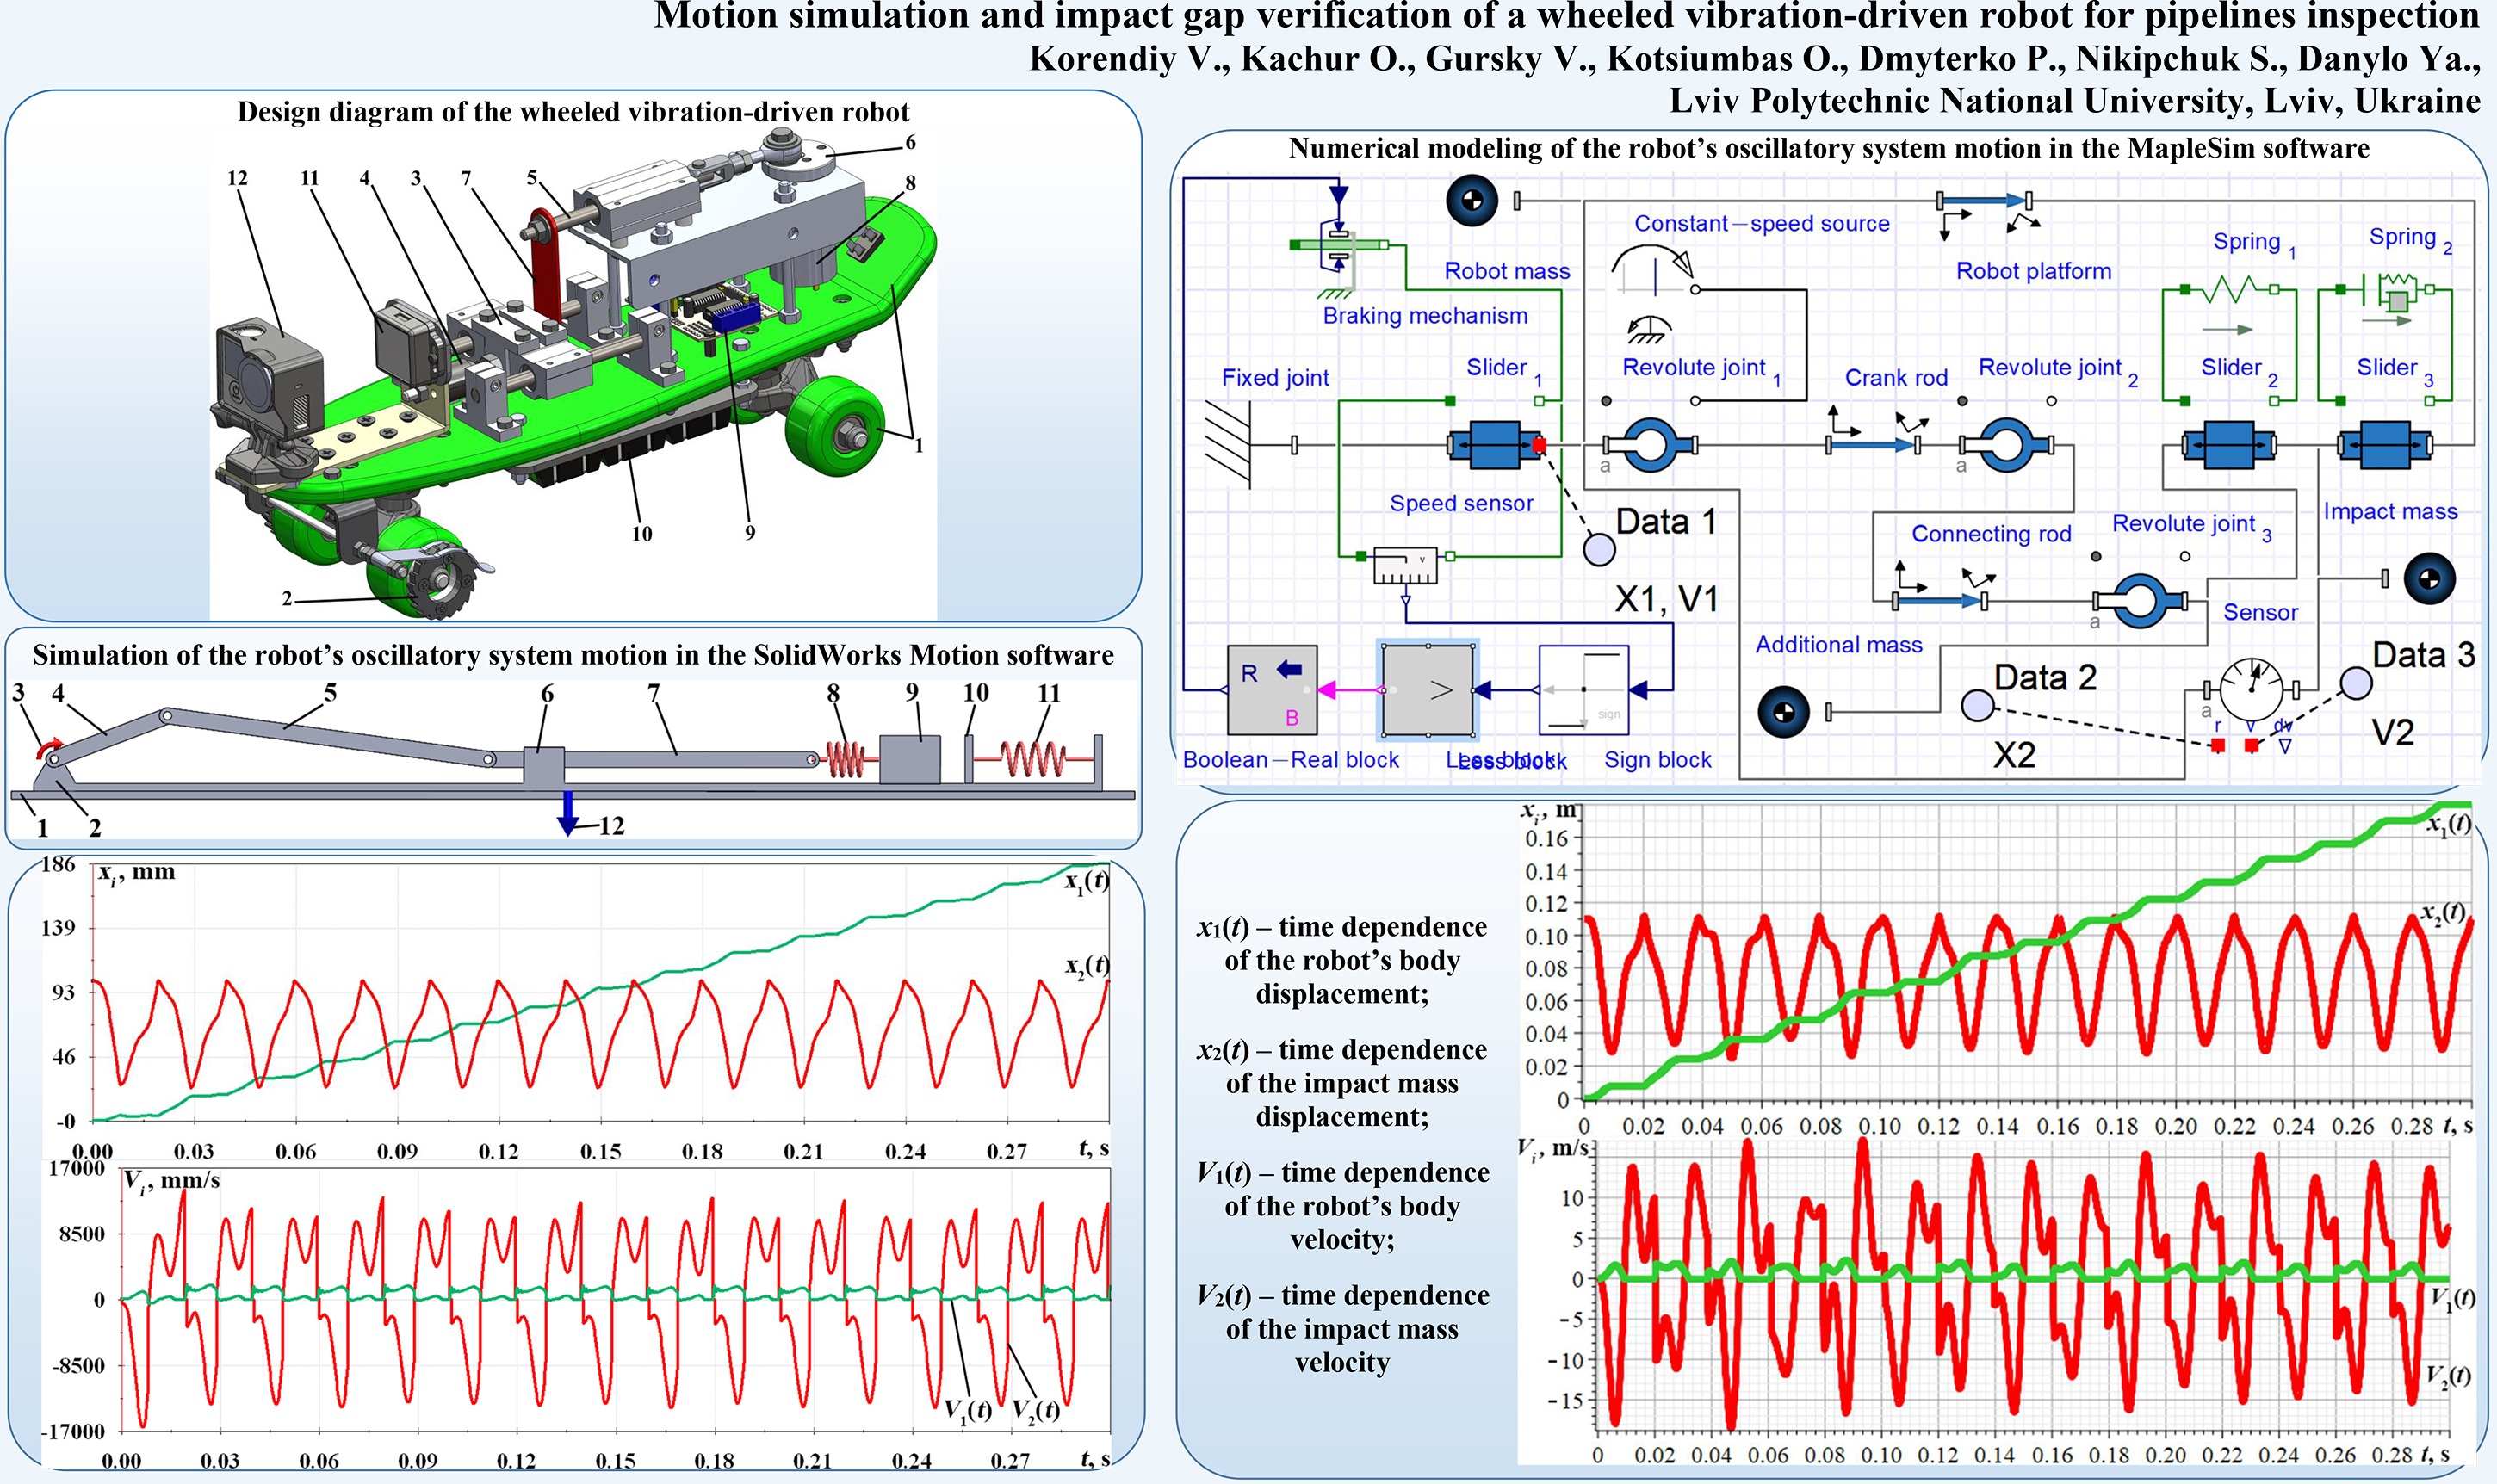 Motion simulation and impact gap verification of a wheeled vibration-driven robot for pipelines inspection